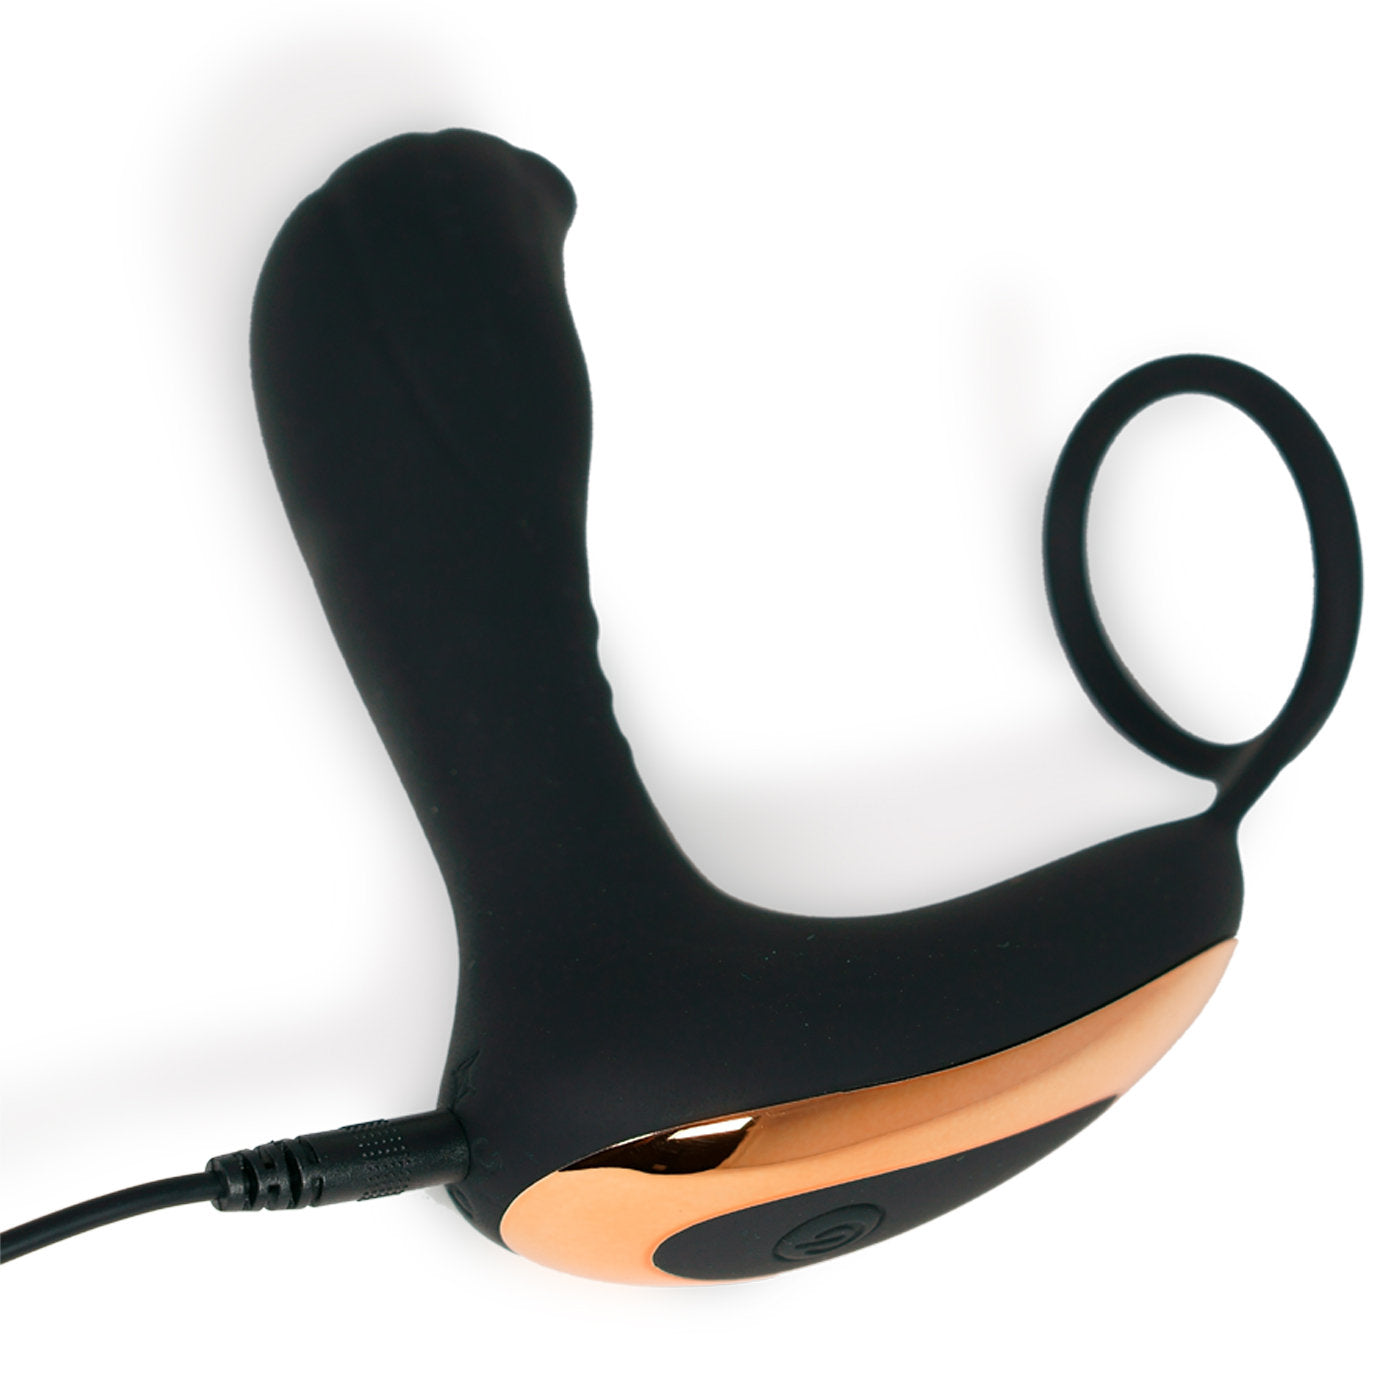 Backdoor Bliss 10 Function Vibrating Prostate Massager With Cock Ring